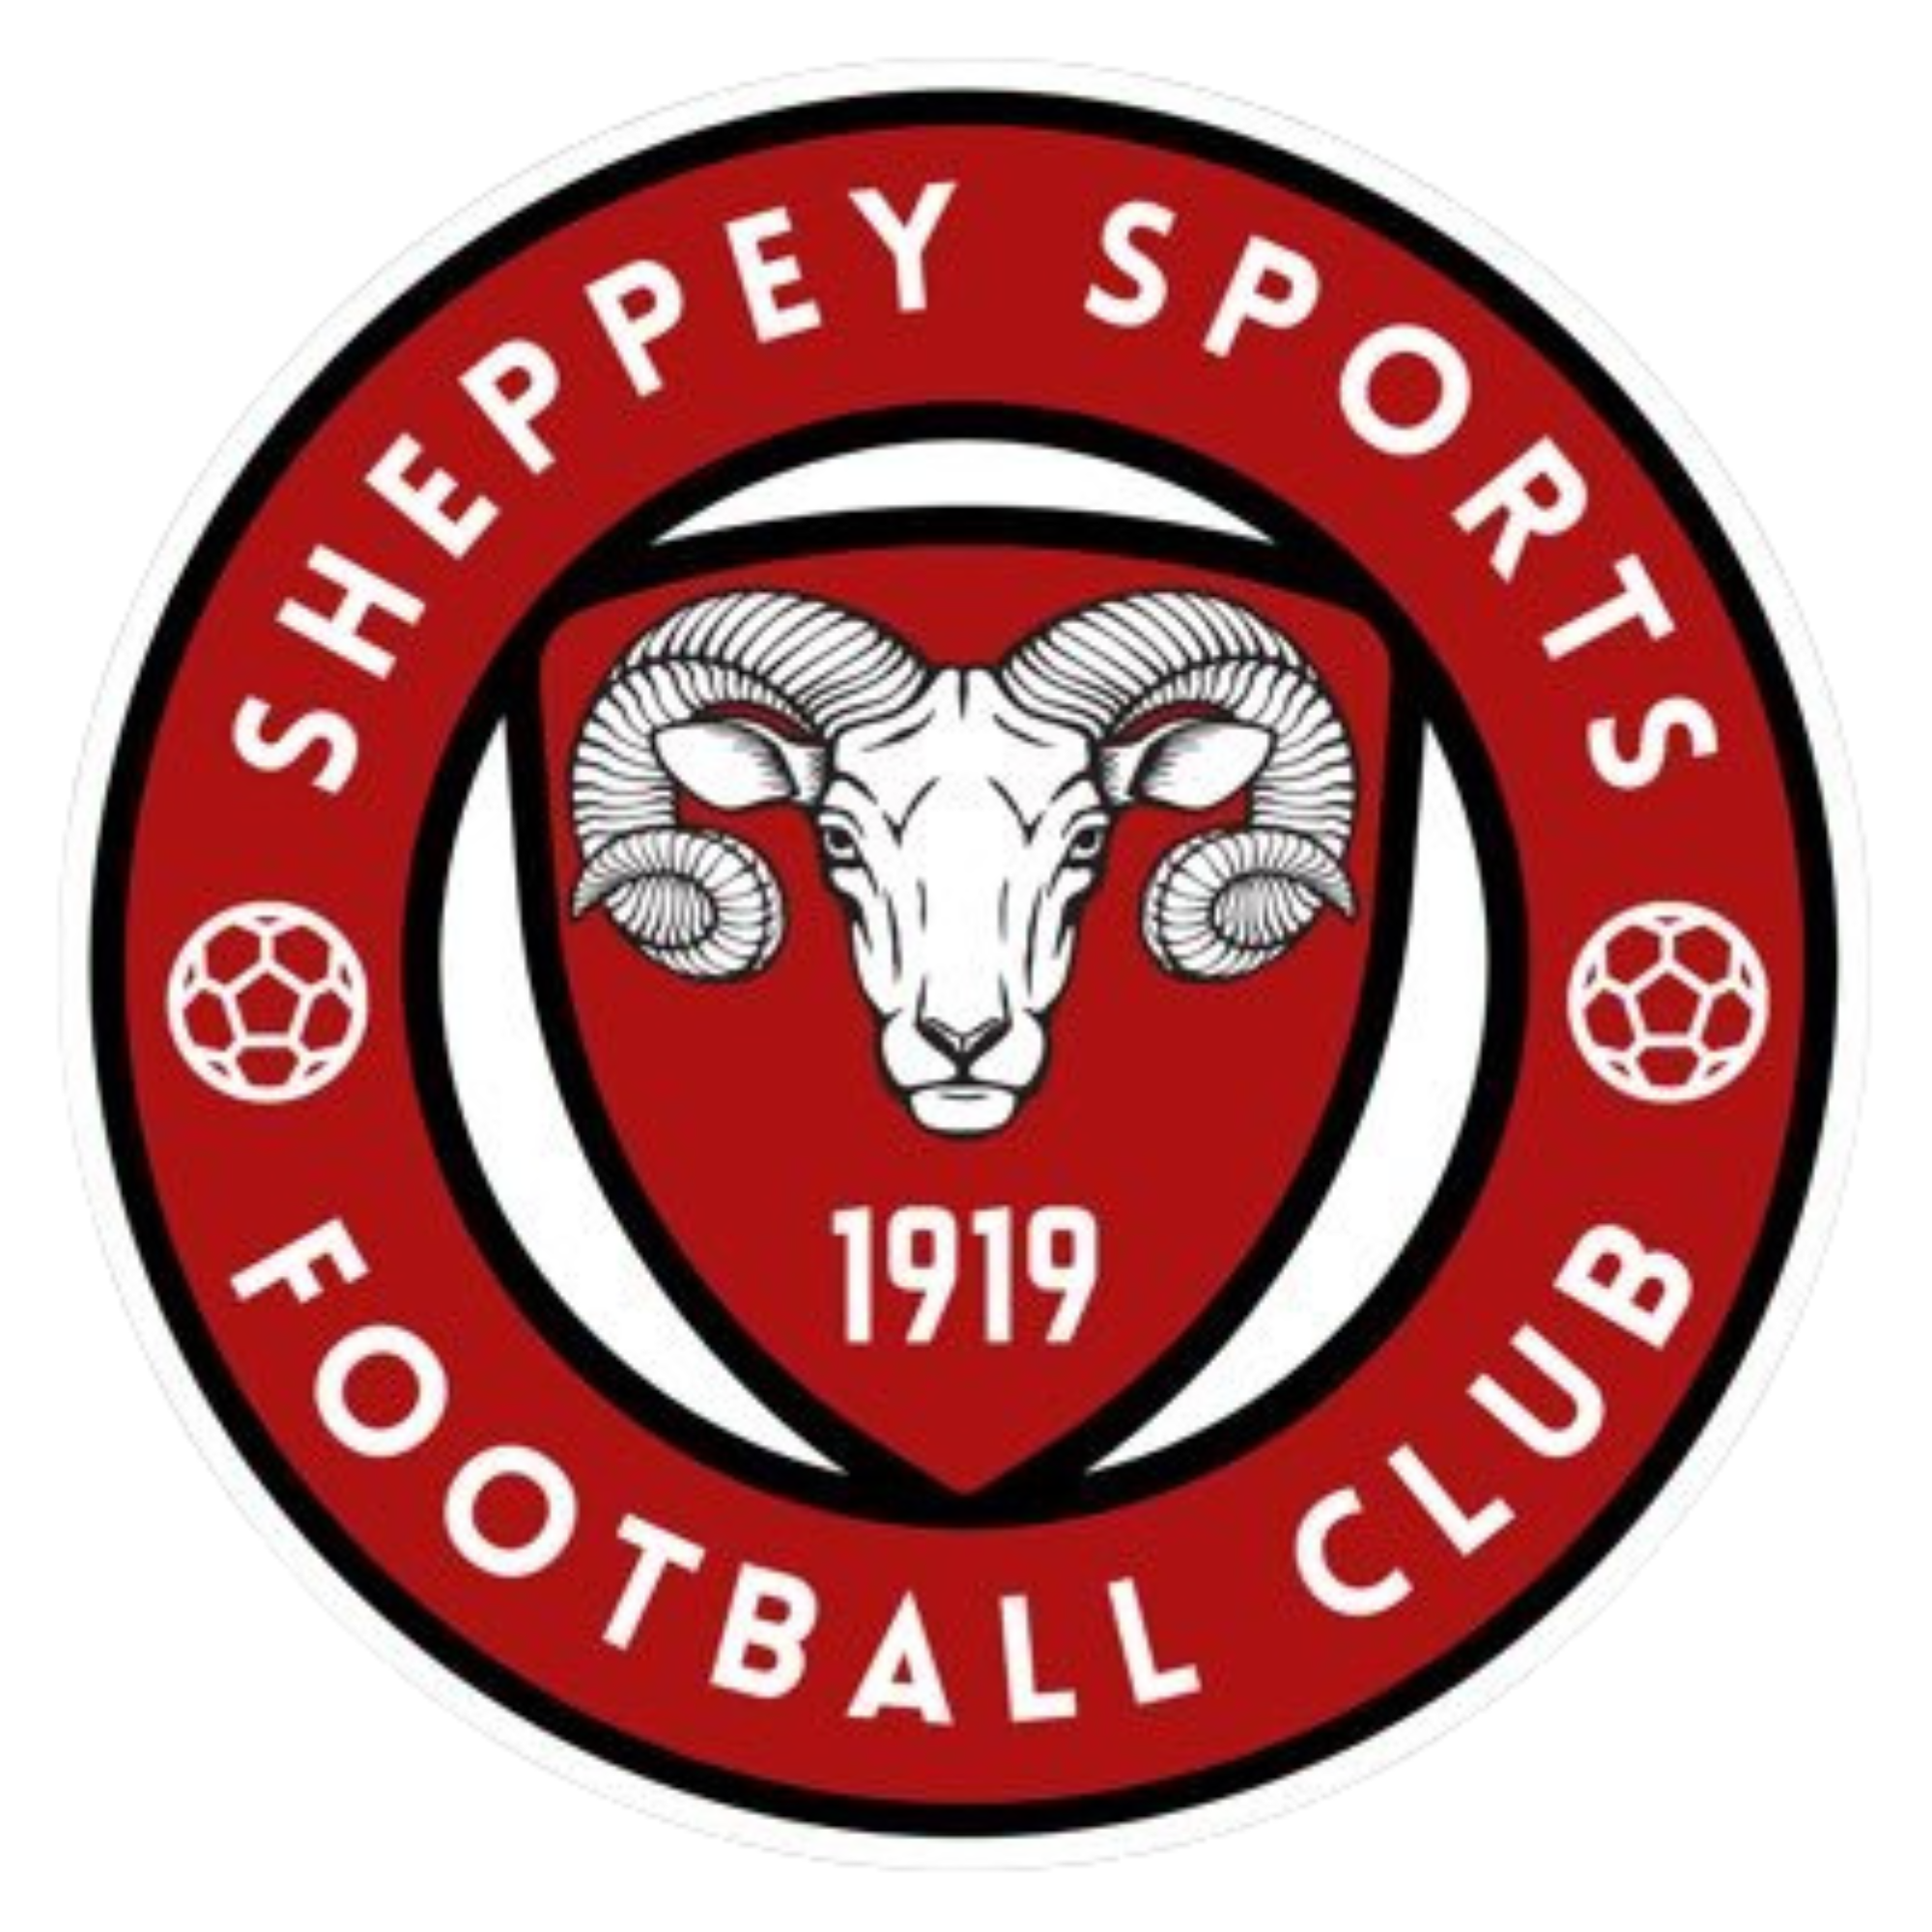 Sheppey Sports